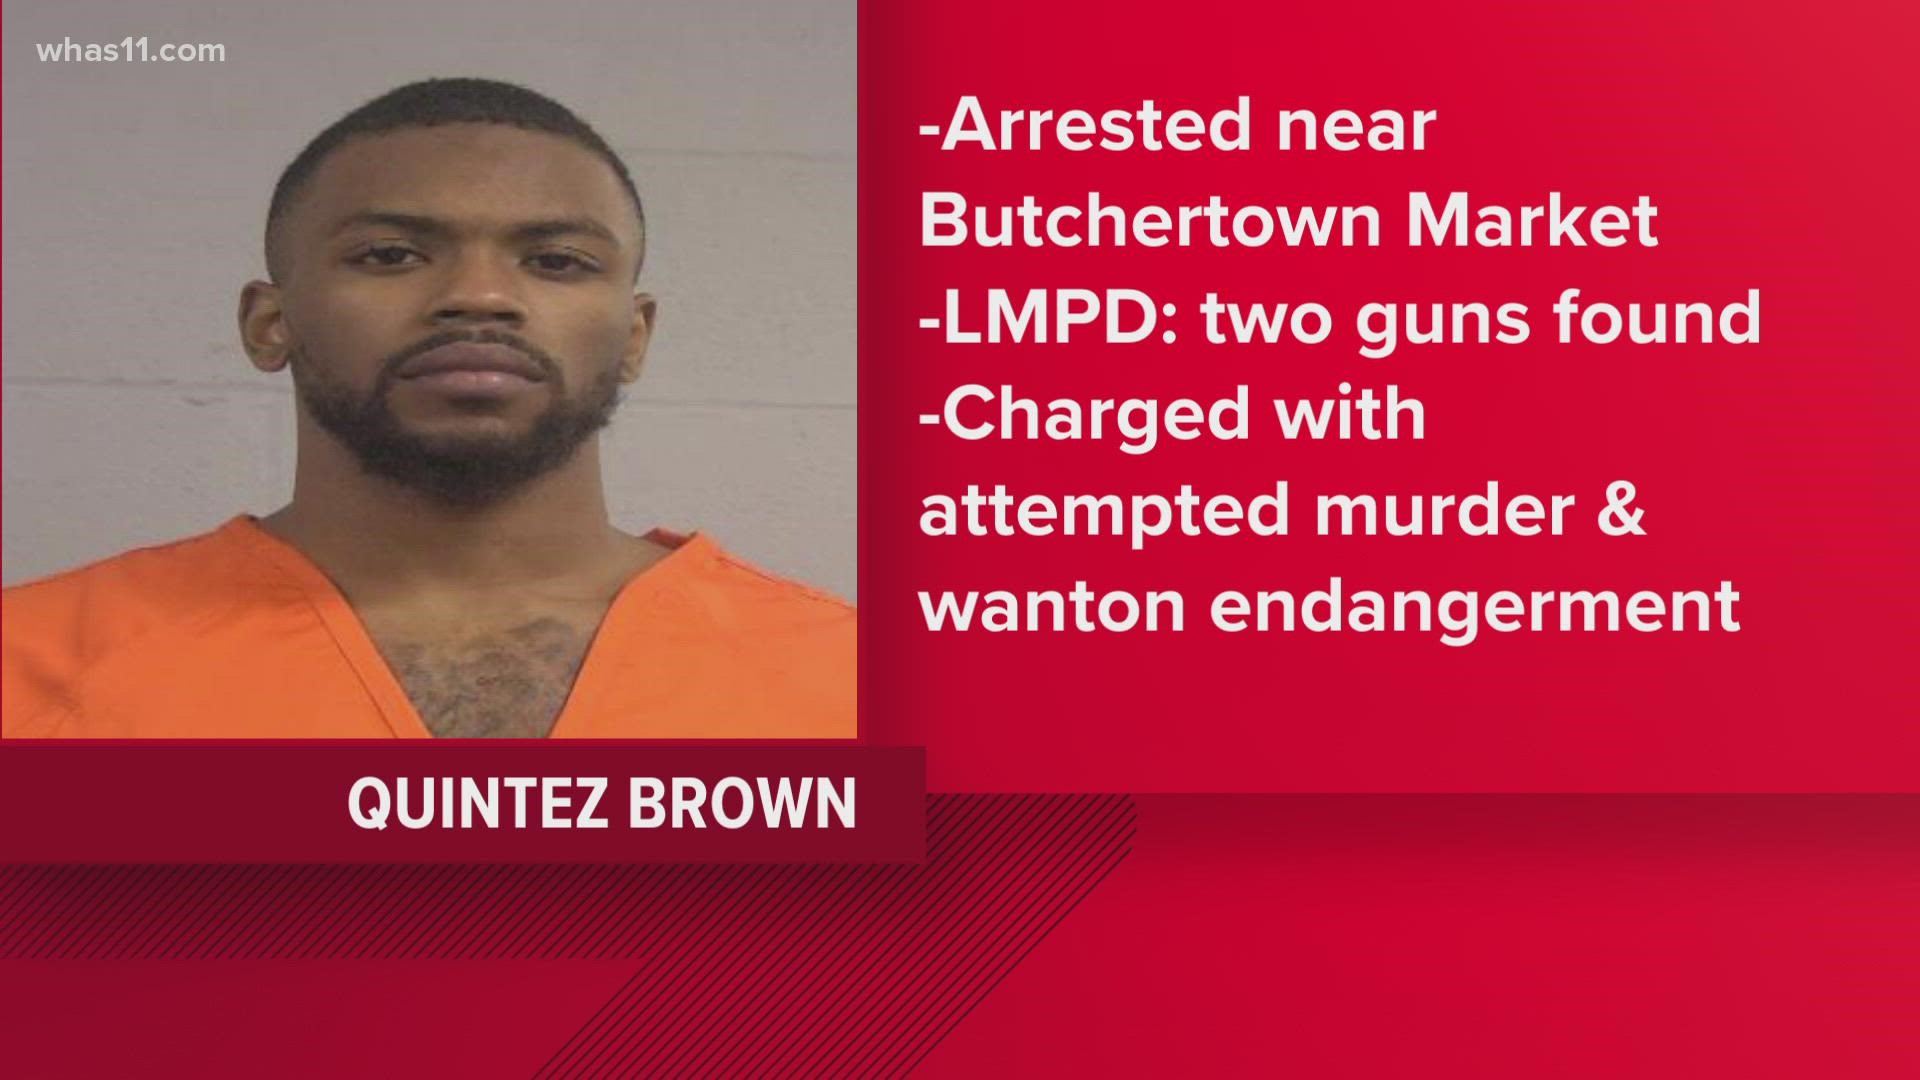 Brown was taken into custody shortly after he allegedly fired shots into Democratic candidate Craig Greensberg's office on Tuesday, according to Louisville police.